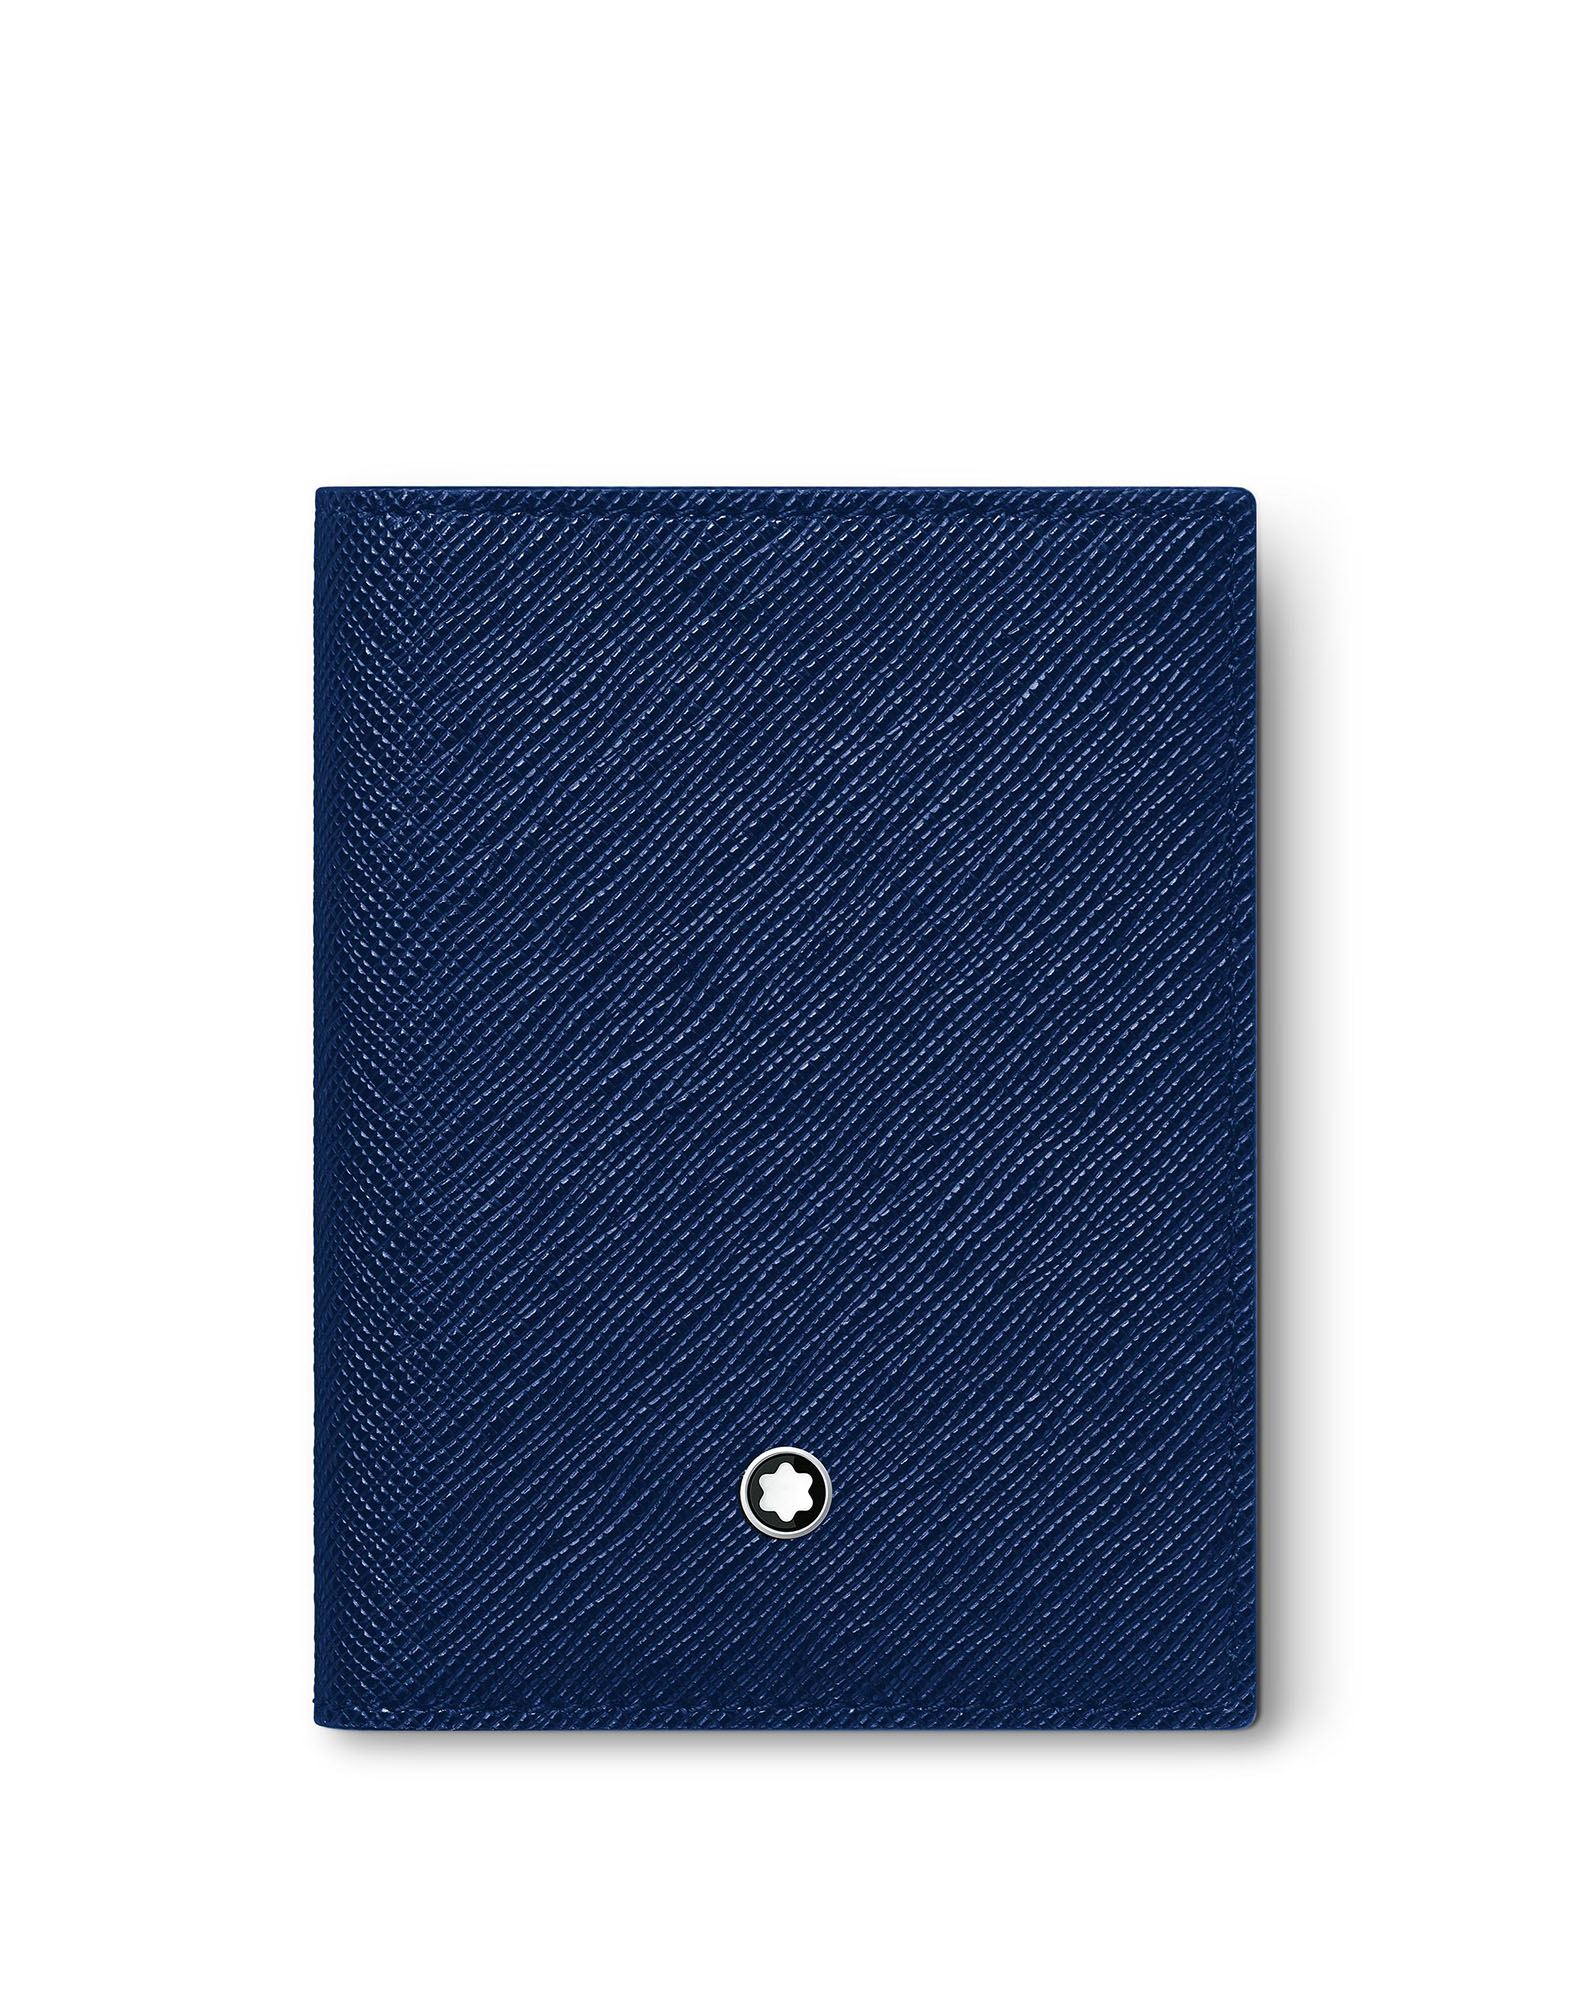 Montblanc Document Holders In Blue